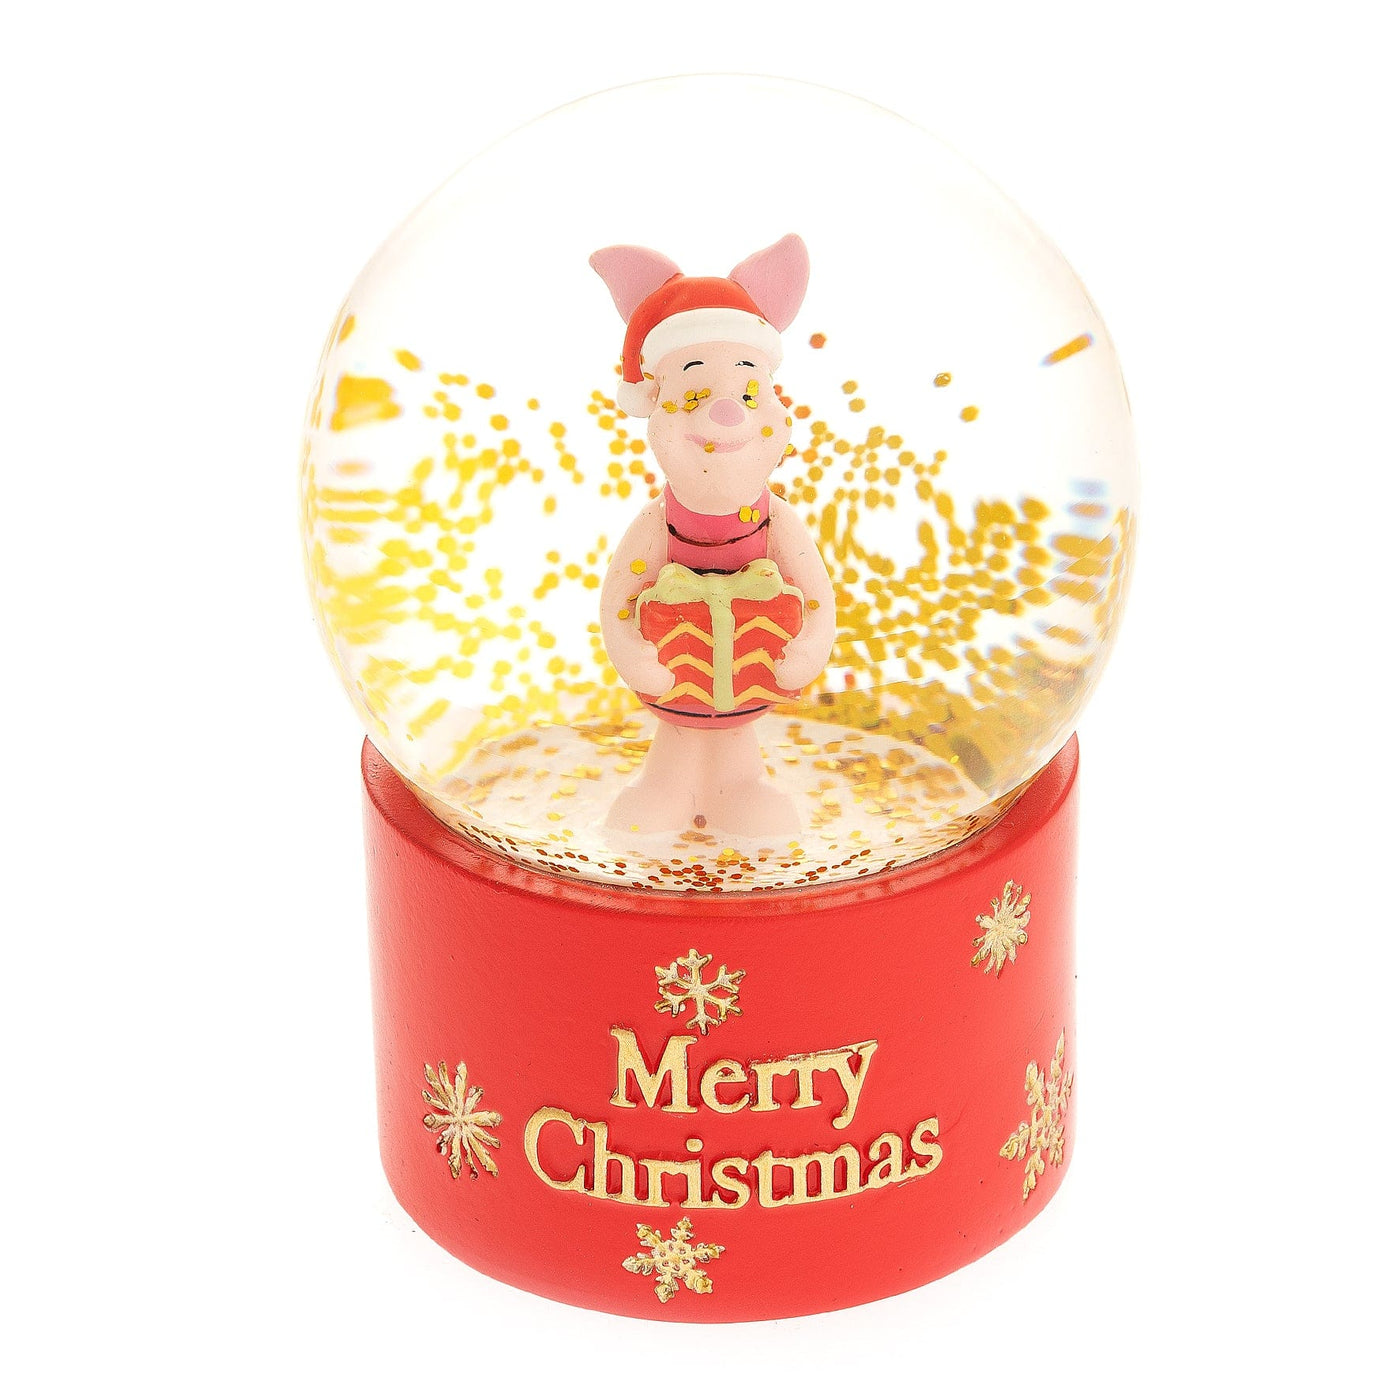 Widdop Gifts Christmas Decorations Piglet Disney Characters Festive Snow Globe